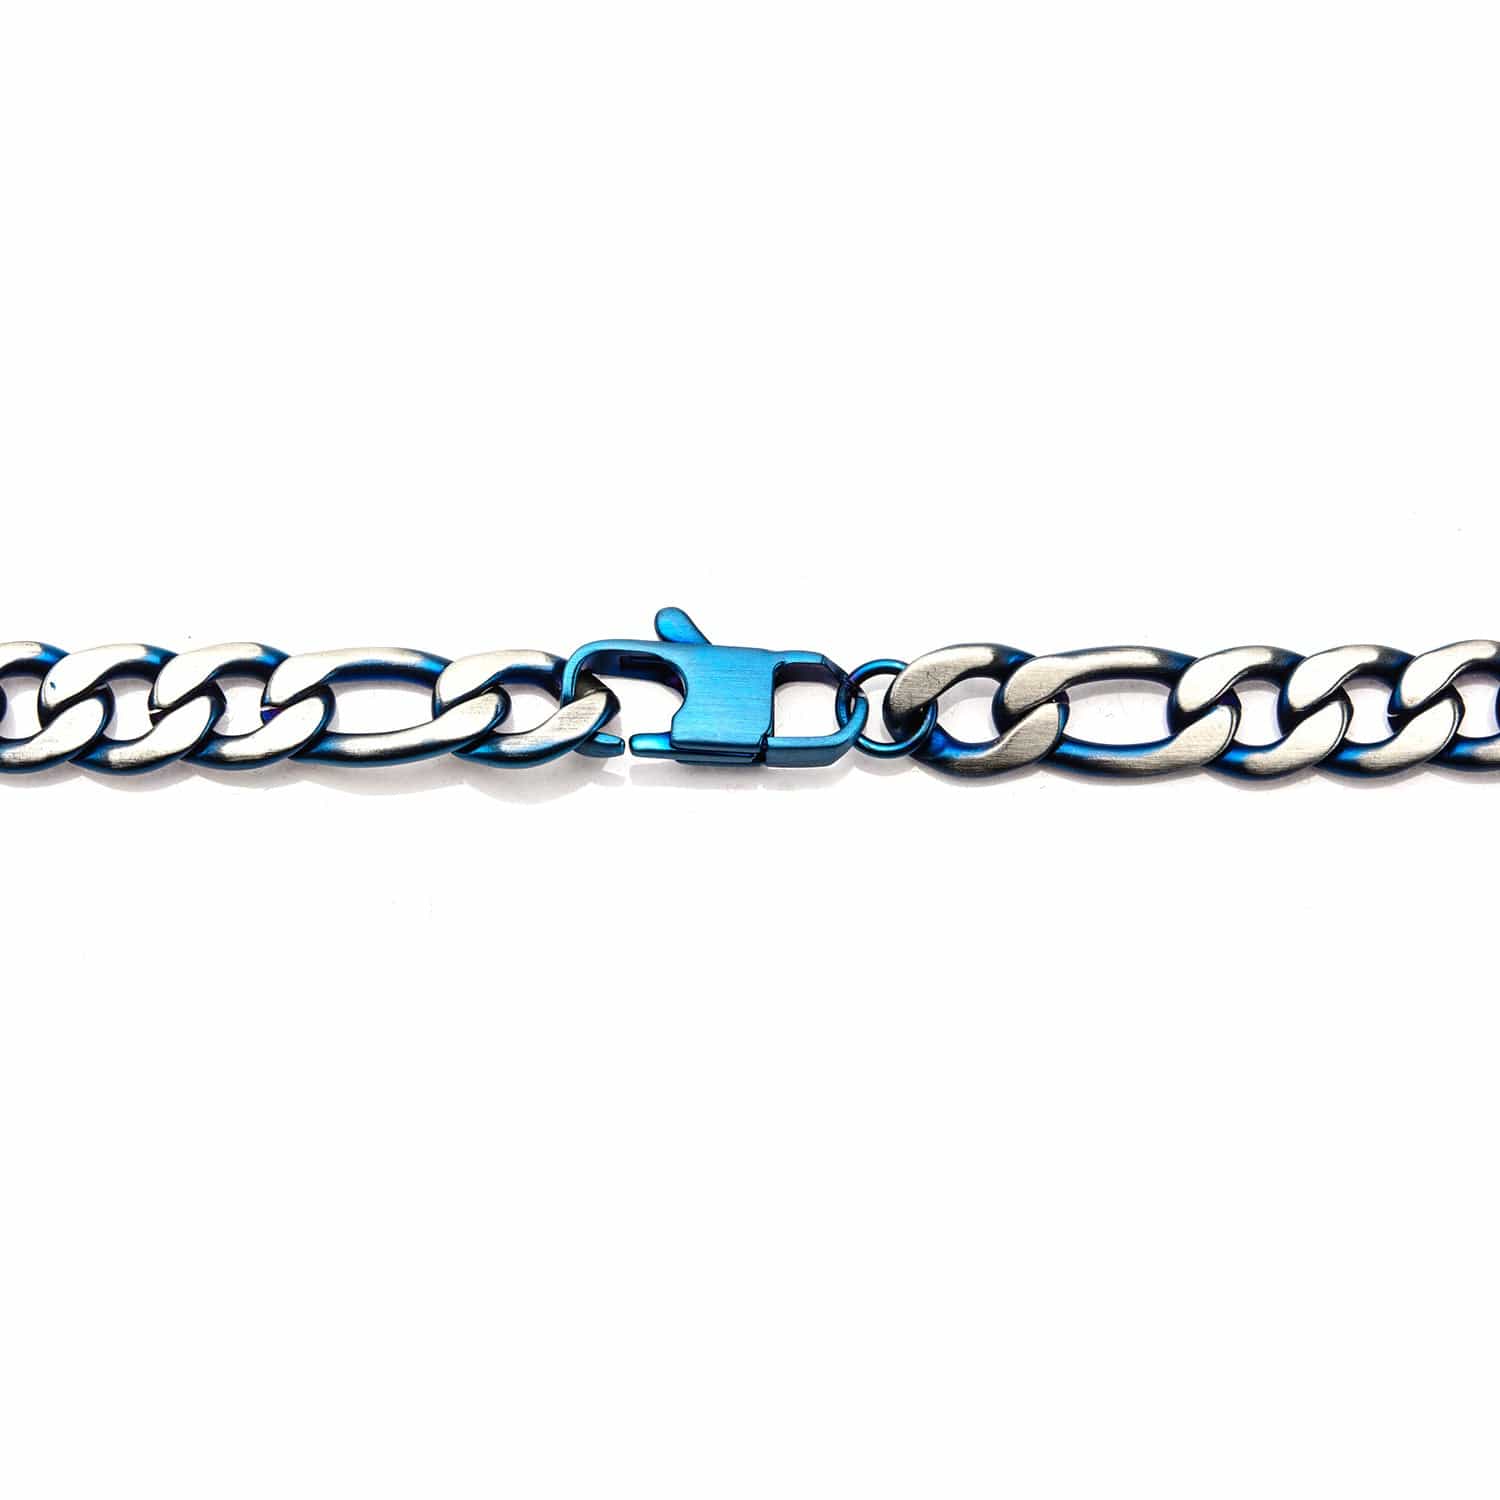 INOX JEWELRY Chains Blue and Silver Tone Stainless Steel Solemn Jewelry Collection 3mm Figaro Link Chain NSTC7628B-24